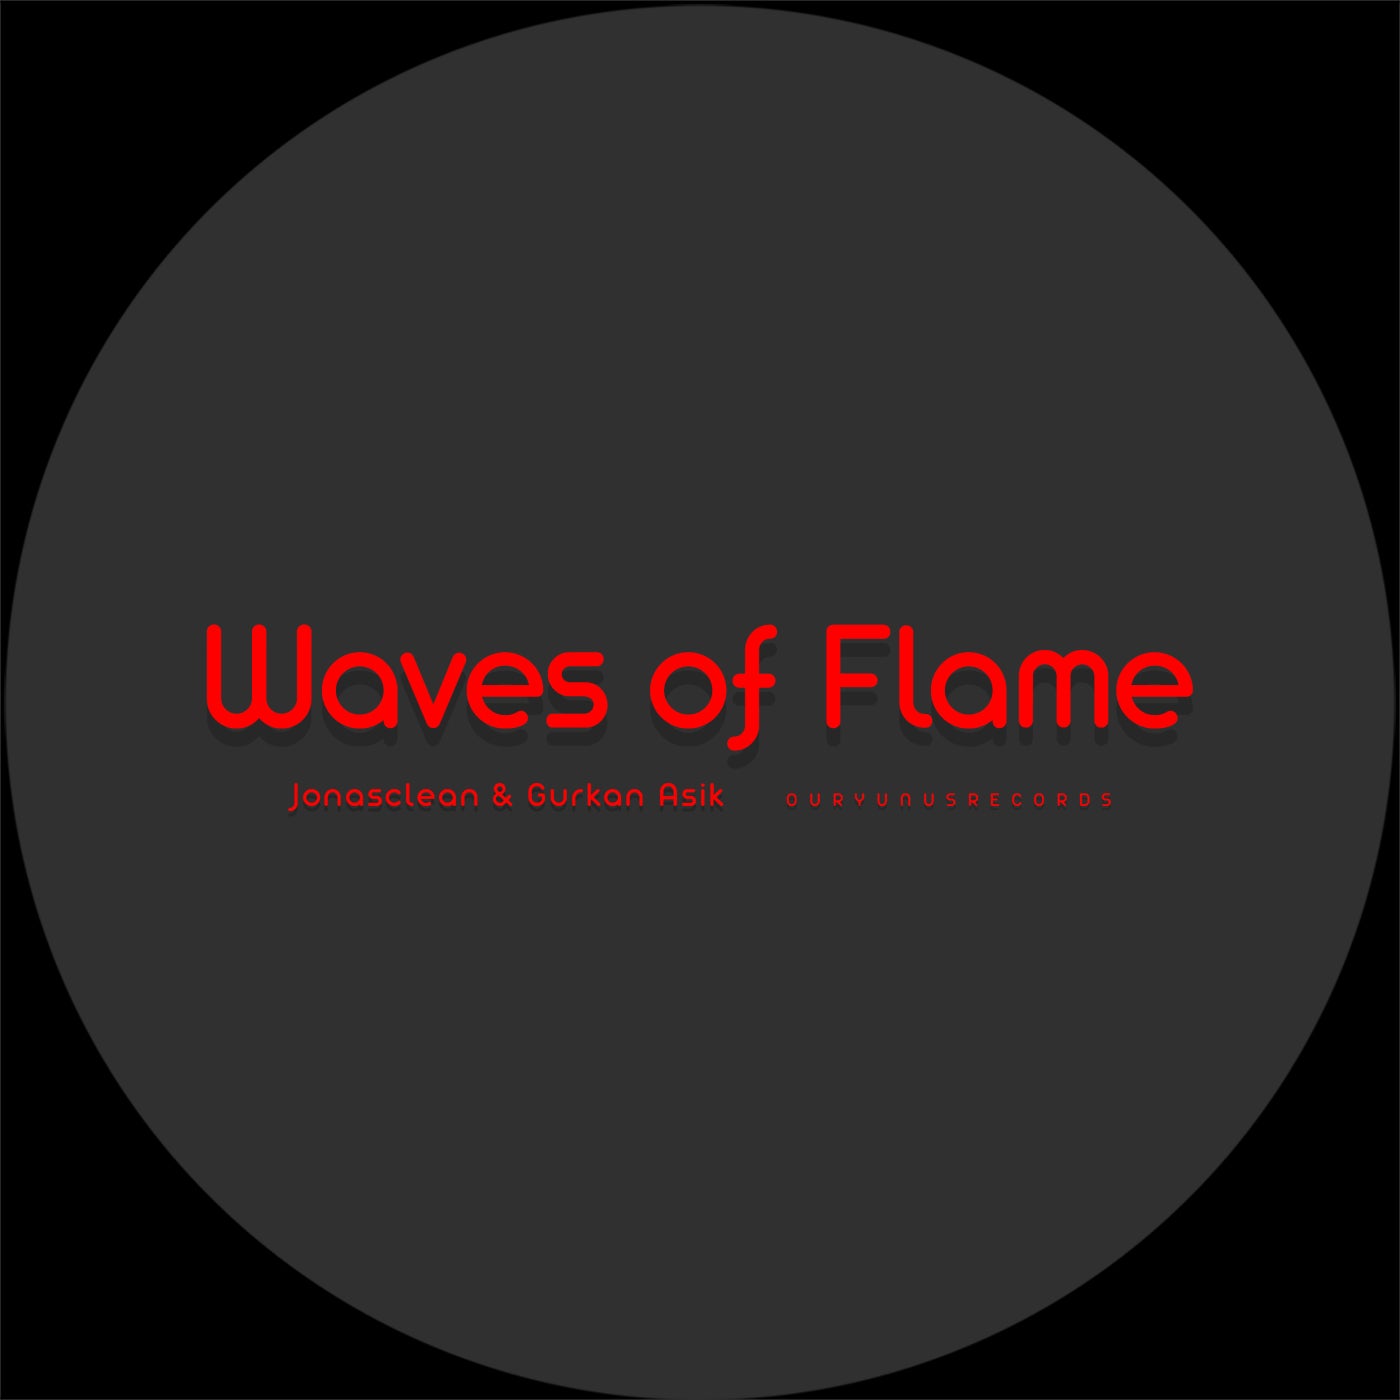 Waves of Flame